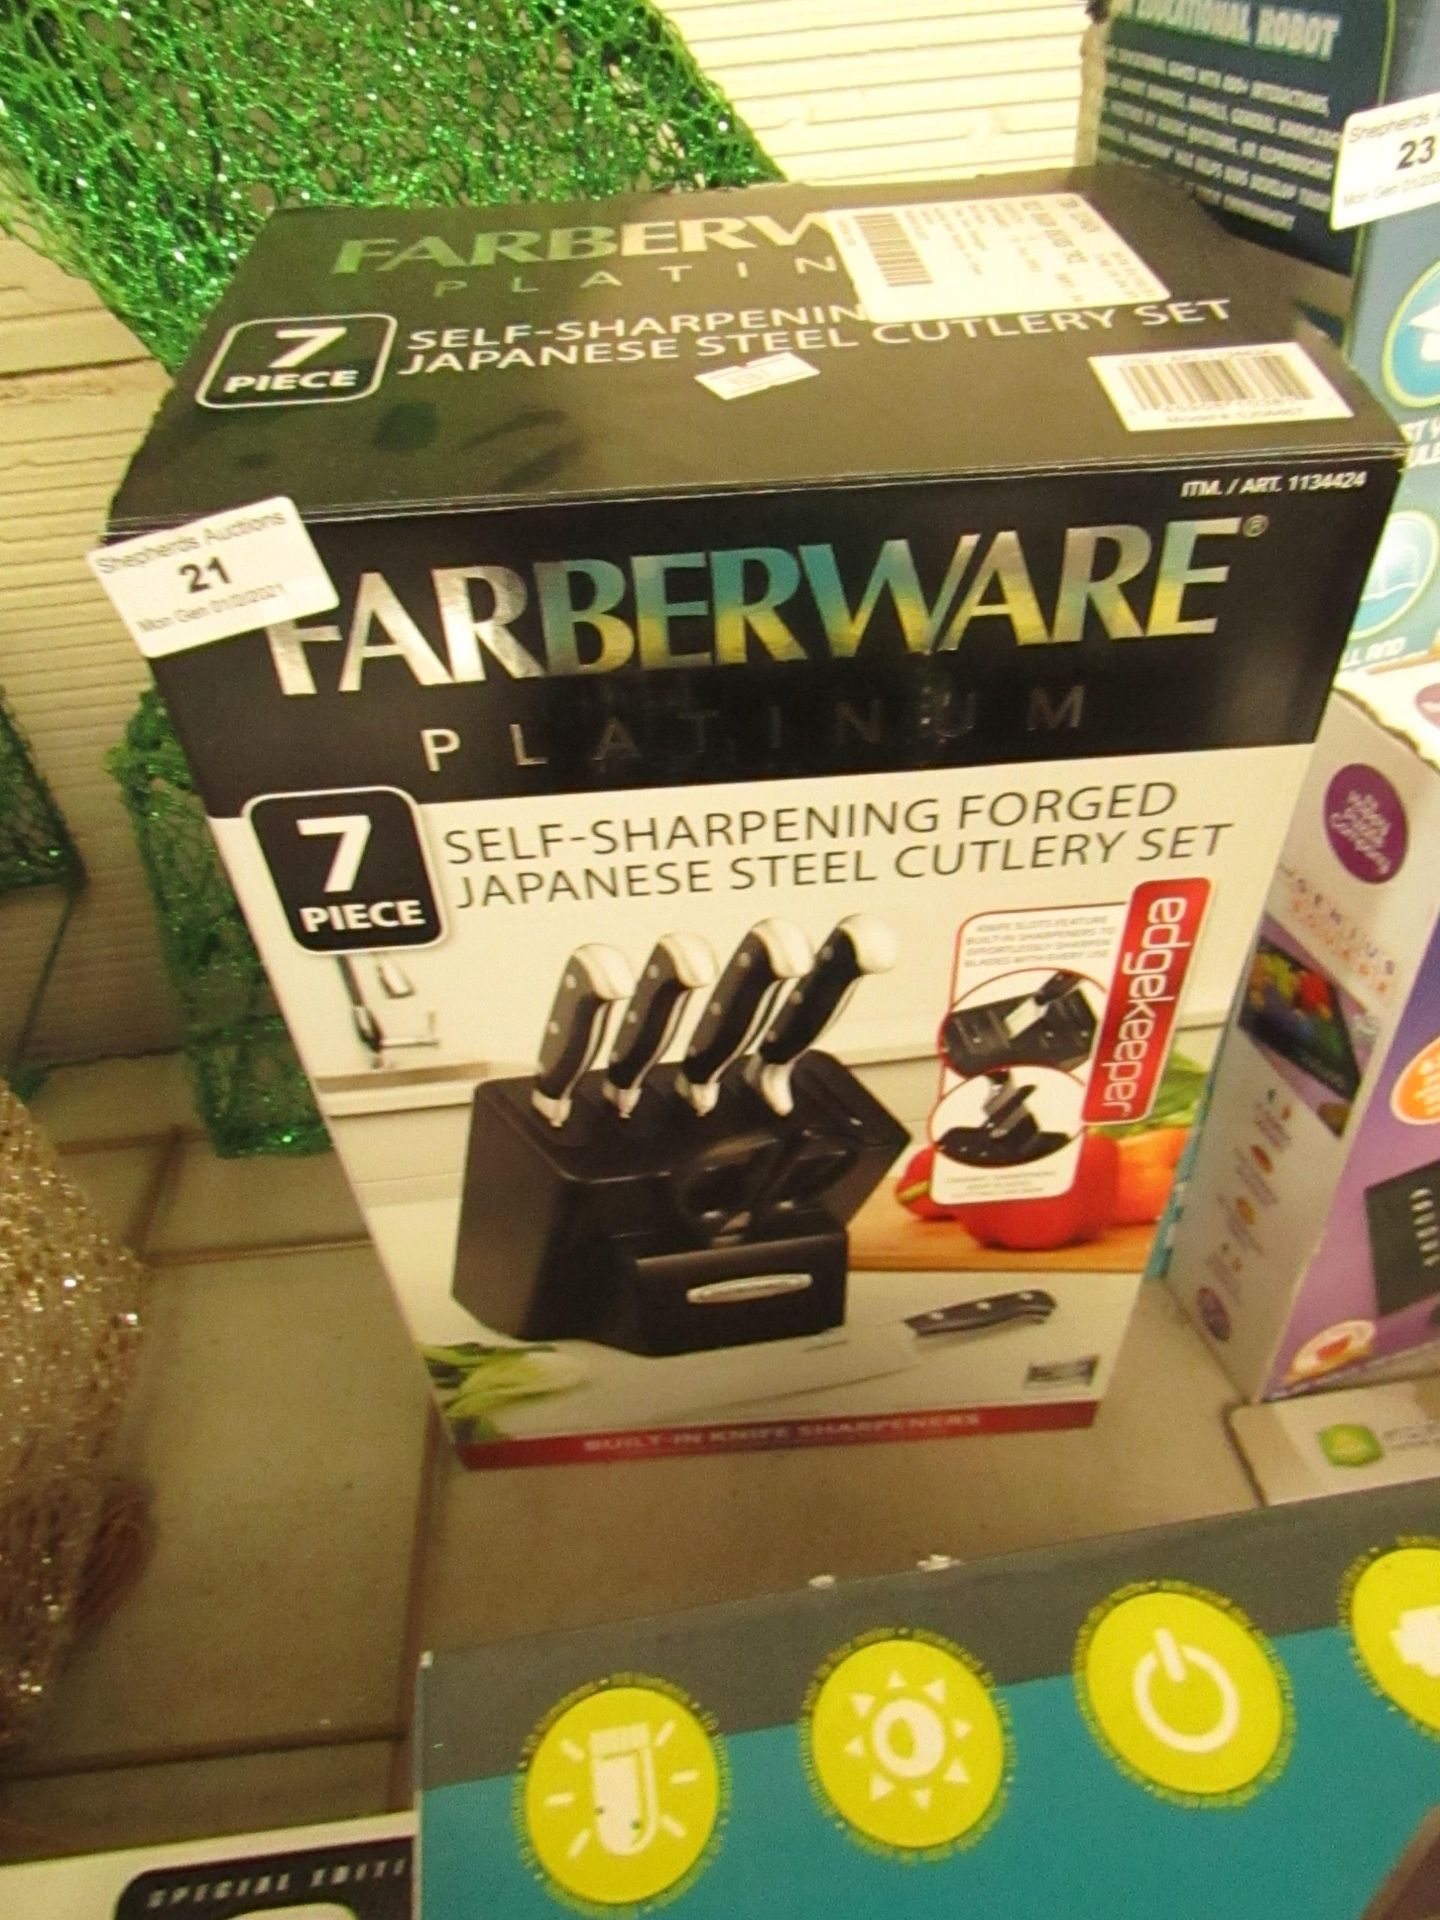 Farberware - Platinum 7 Pc Self-Sharpening Forged Japanese Steel Cutlery Set - Unchecked & Boxed.